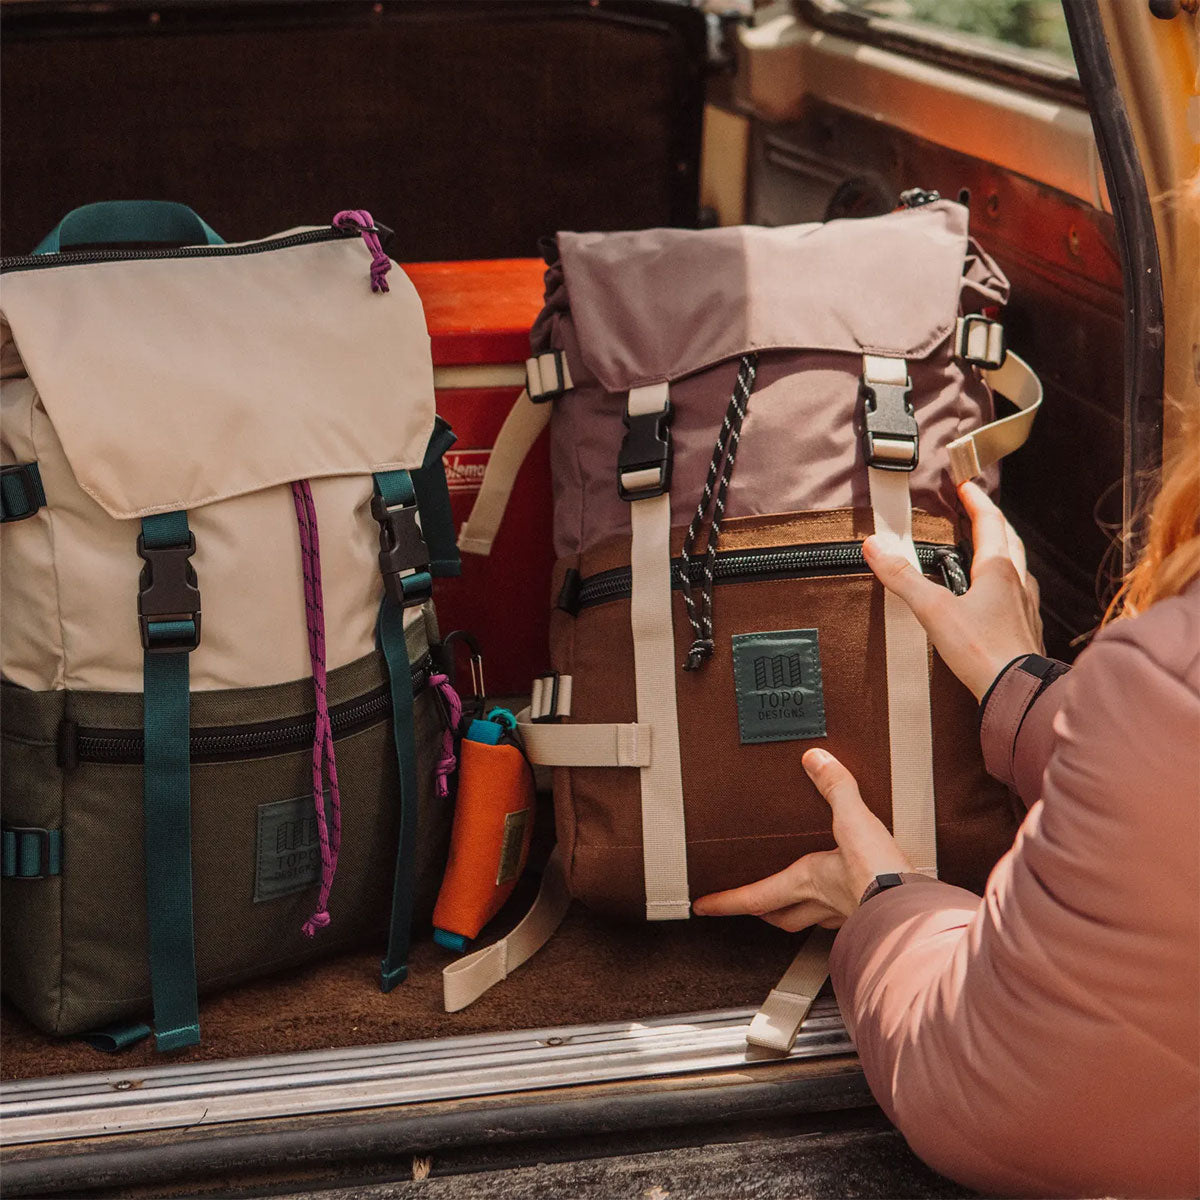 Topo Designs : Rover Pack Classic : Rose/Geode Green